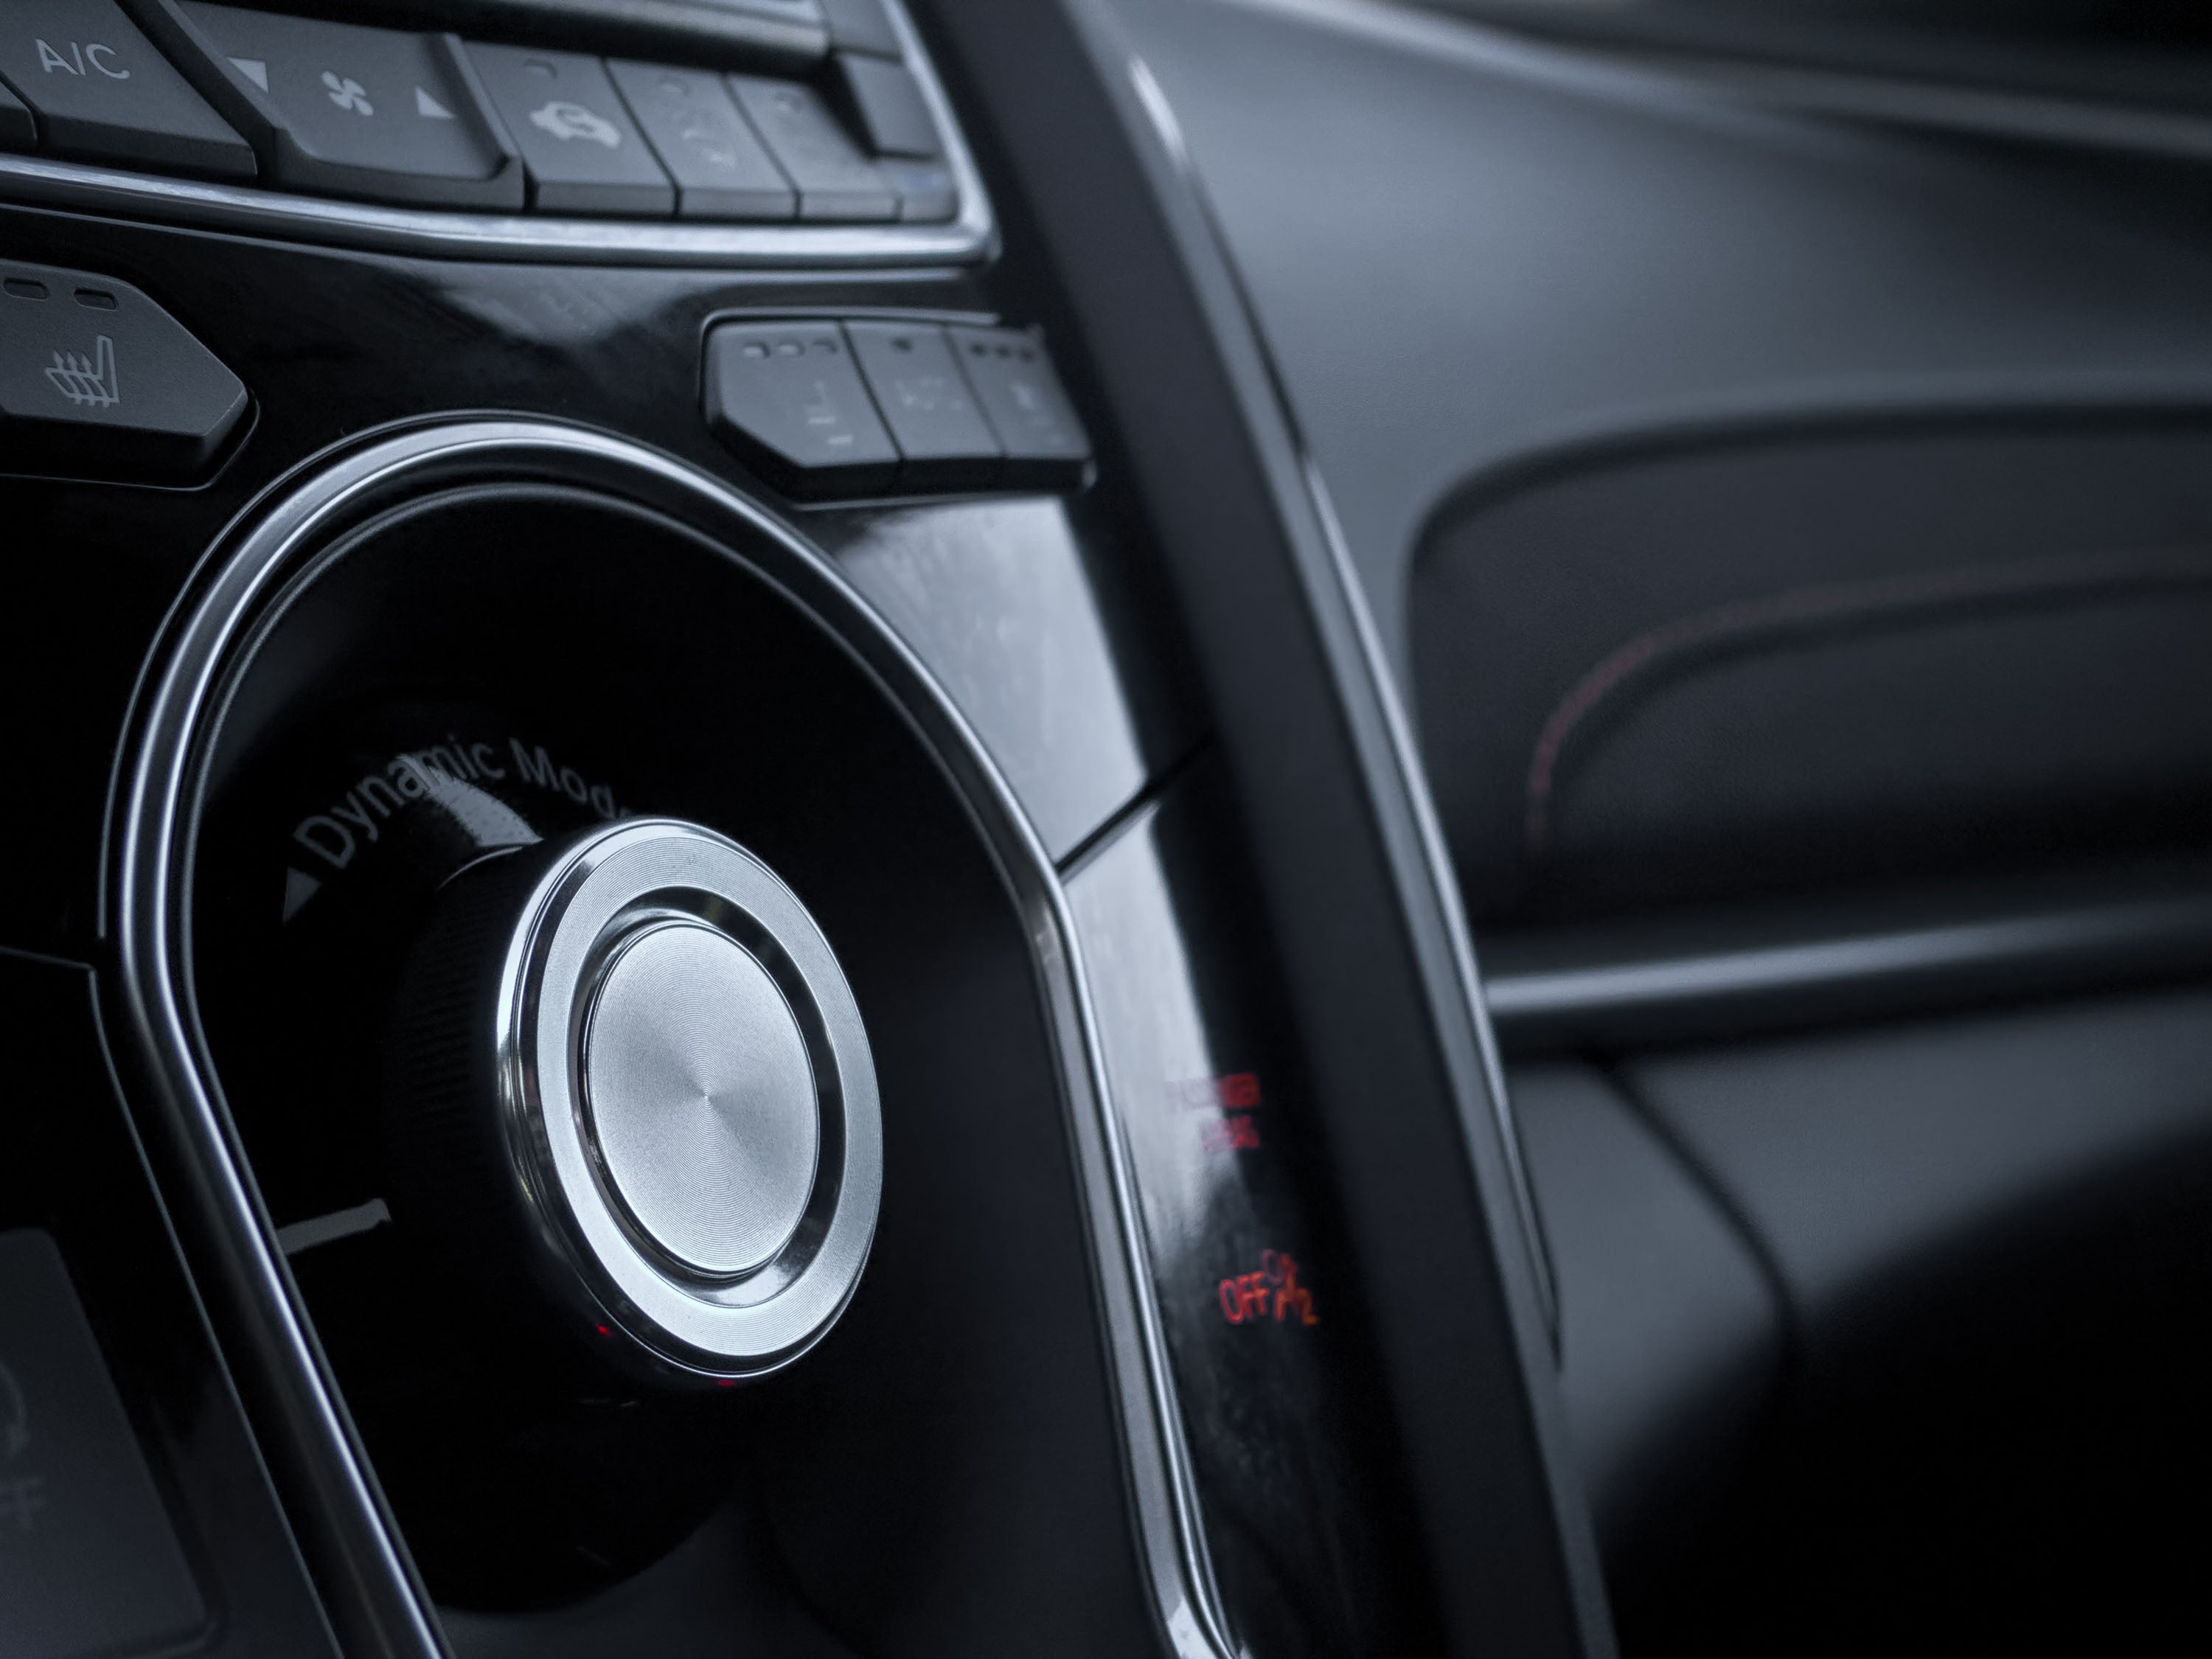 A close-up of a car's control panel featuring a "Dynamic Mode" knob and various function buttons.